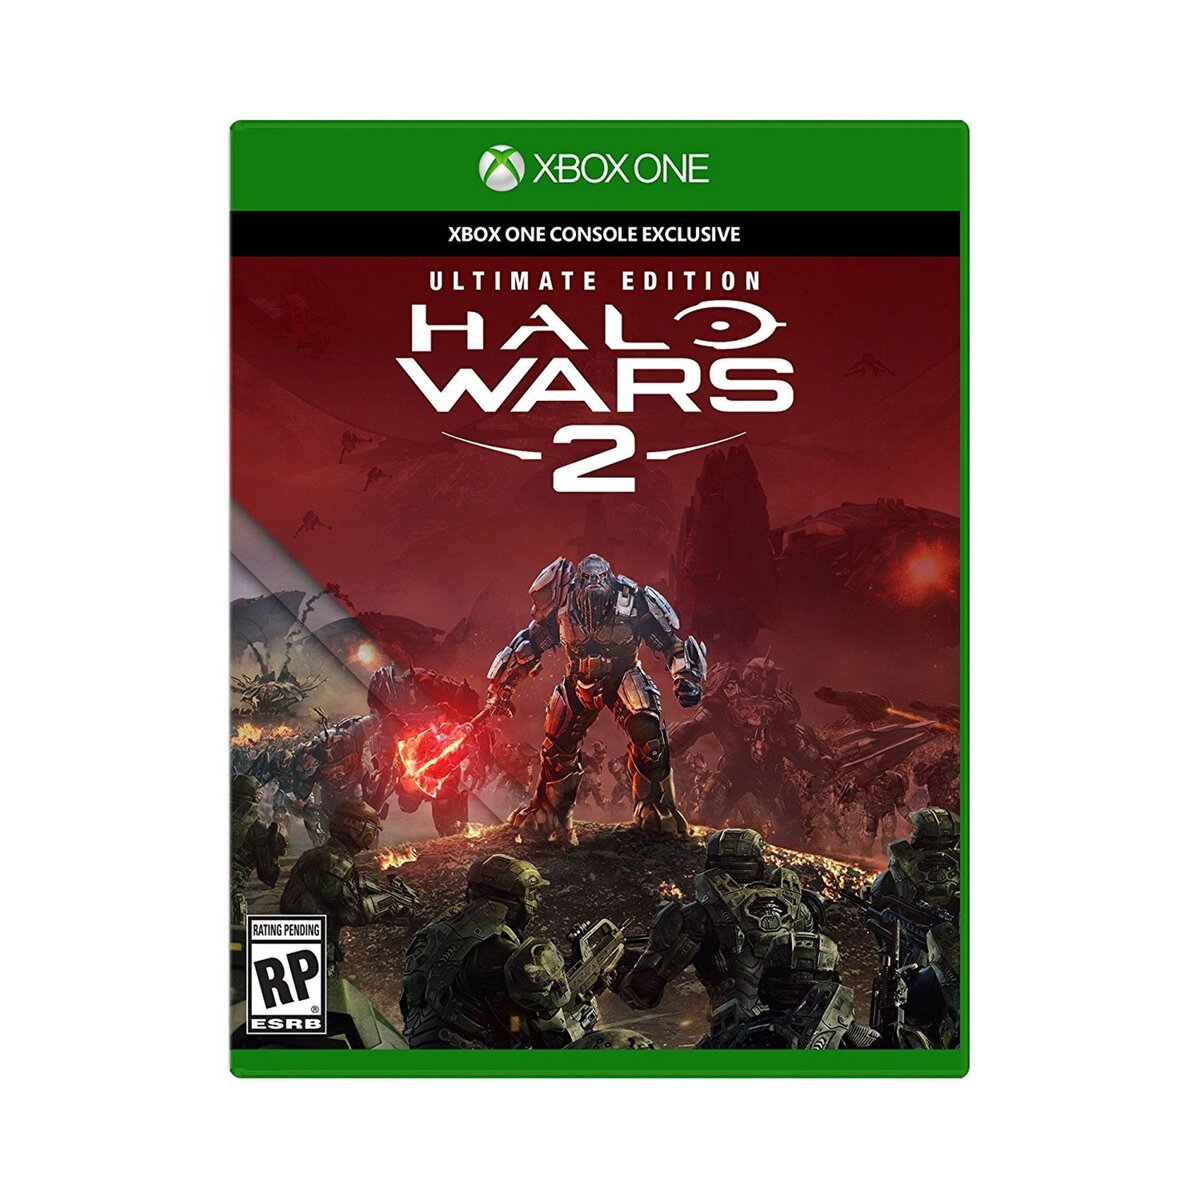 Halo Wars 2 - Ultimate Edition Xbox One